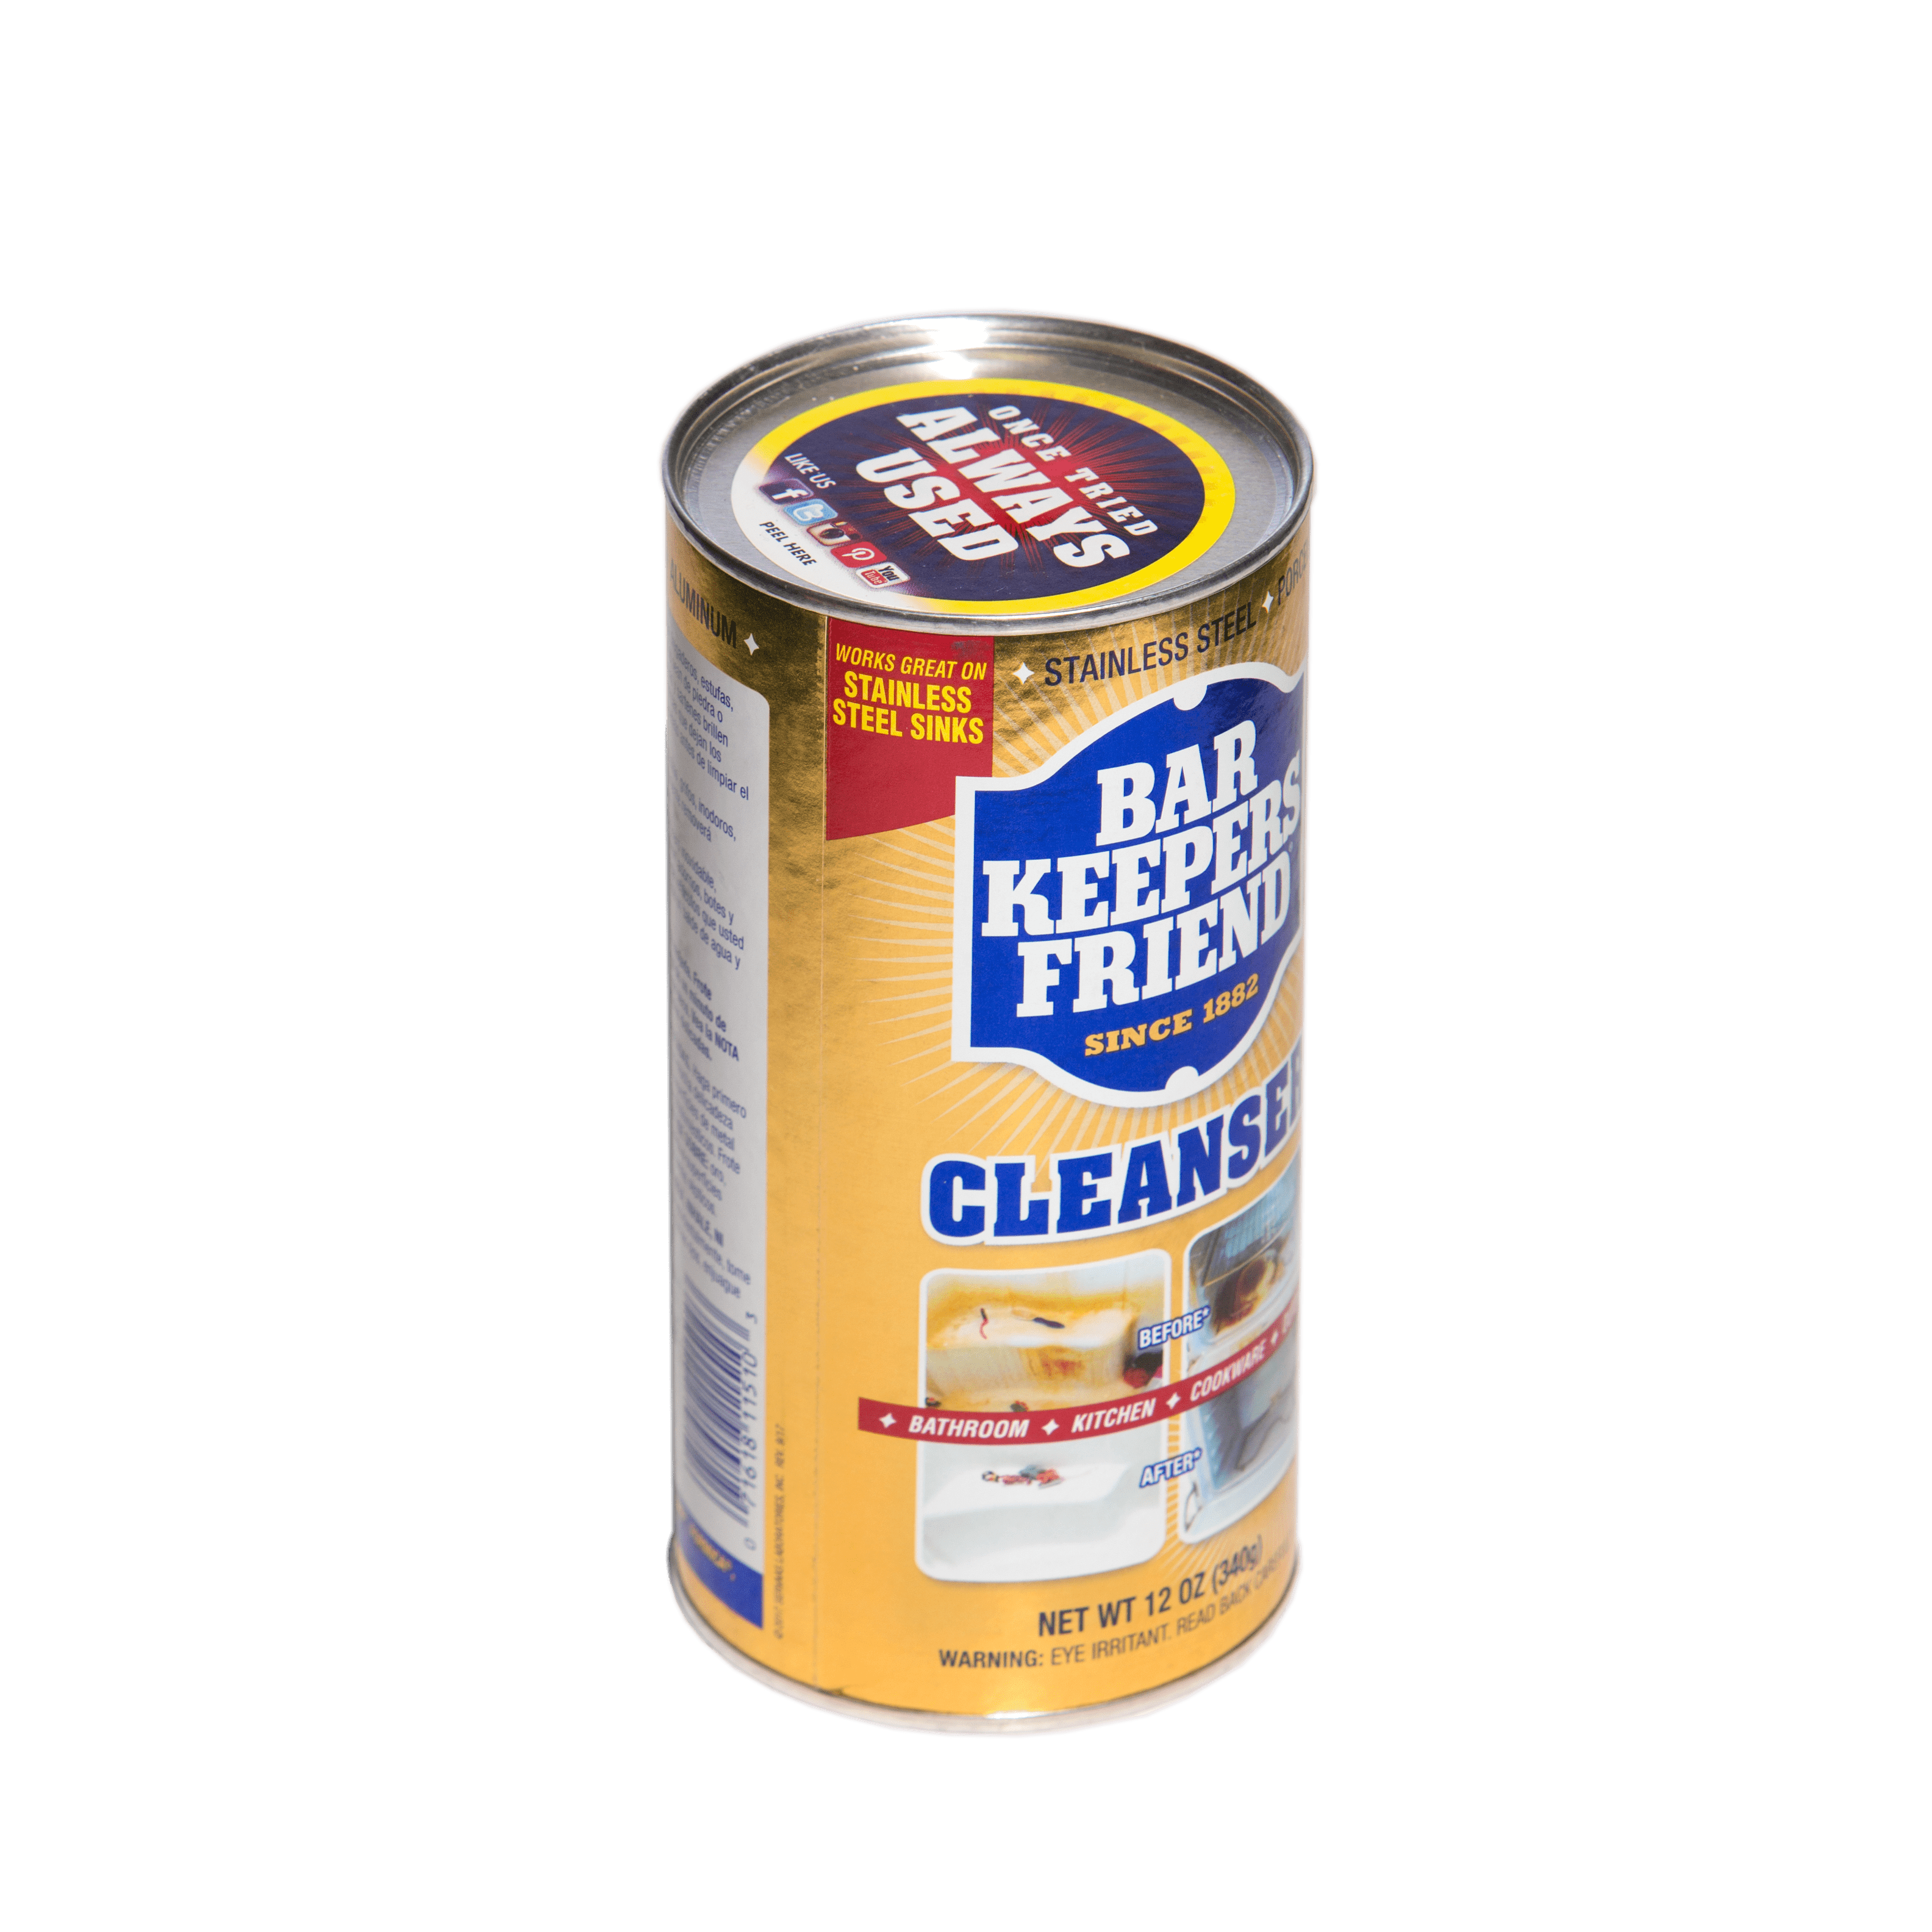 Cleansing powder 425g - Bar Keepers Friend